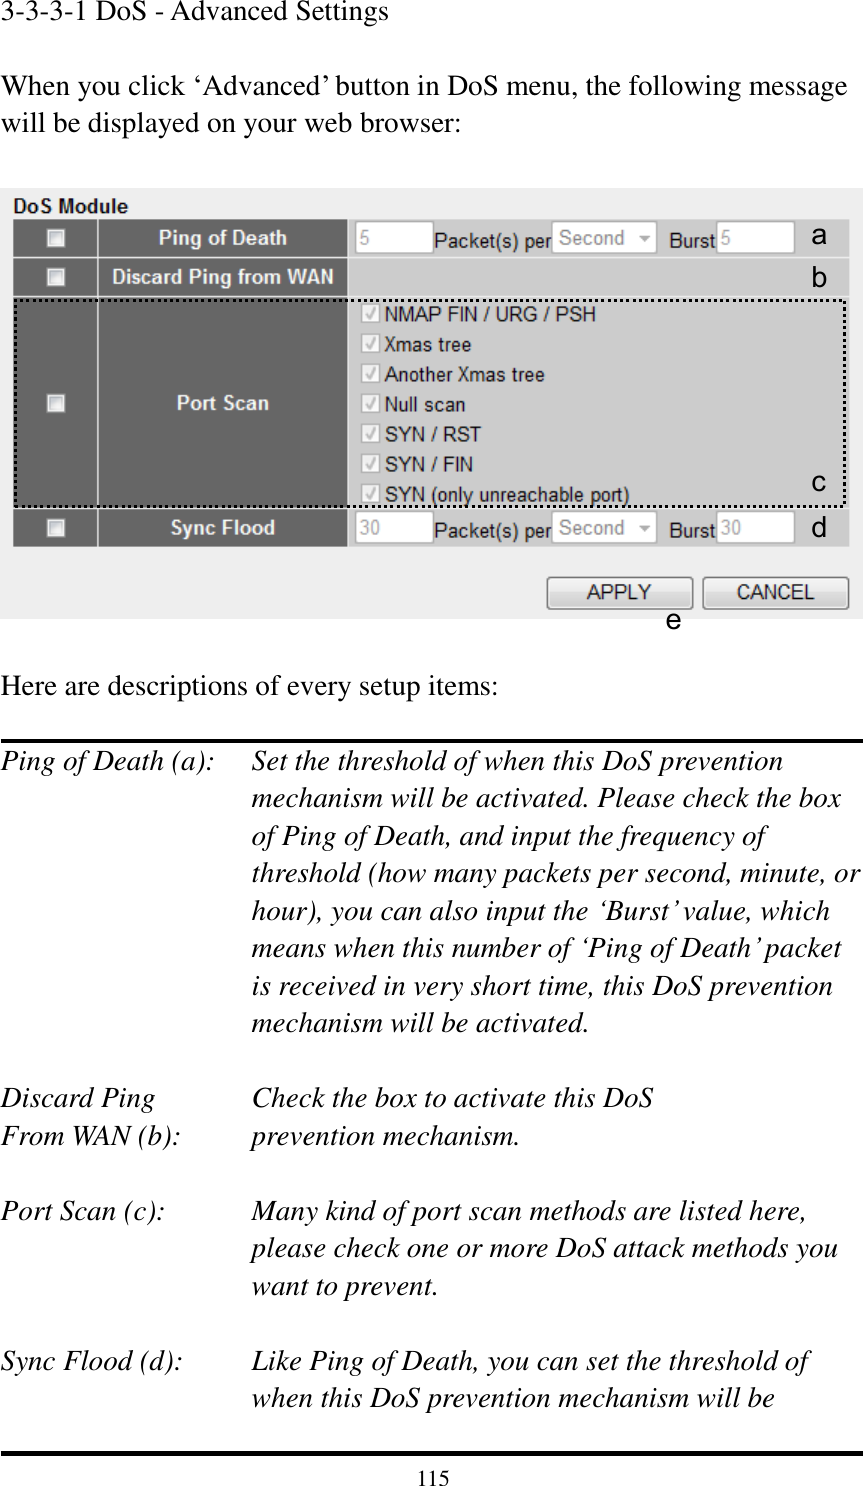 115 3-3-3-1 DoS - Advanced Settings  When you click „Advanced‟ button in DoS menu, the following message will be displayed on your web browser:    Here are descriptions of every setup items:  Ping of Death (a):    Set the threshold of when this DoS prevention mechanism will be activated. Please check the box of Ping of Death, and input the frequency of threshold (how many packets per second, minute, or hour), you can also input the „Burst‟ value, which means when this number of „Ping of Death‟ packet is received in very short time, this DoS prevention mechanism will be activated.  Discard Ping      Check the box to activate this DoS From WAN (b):     prevention mechanism.  Port Scan (c):    Many kind of port scan methods are listed here, please check one or more DoS attack methods you want to prevent.  Sync Flood (d):    Like Ping of Death, you can set the threshold of when this DoS prevention mechanism will be a b c d e 